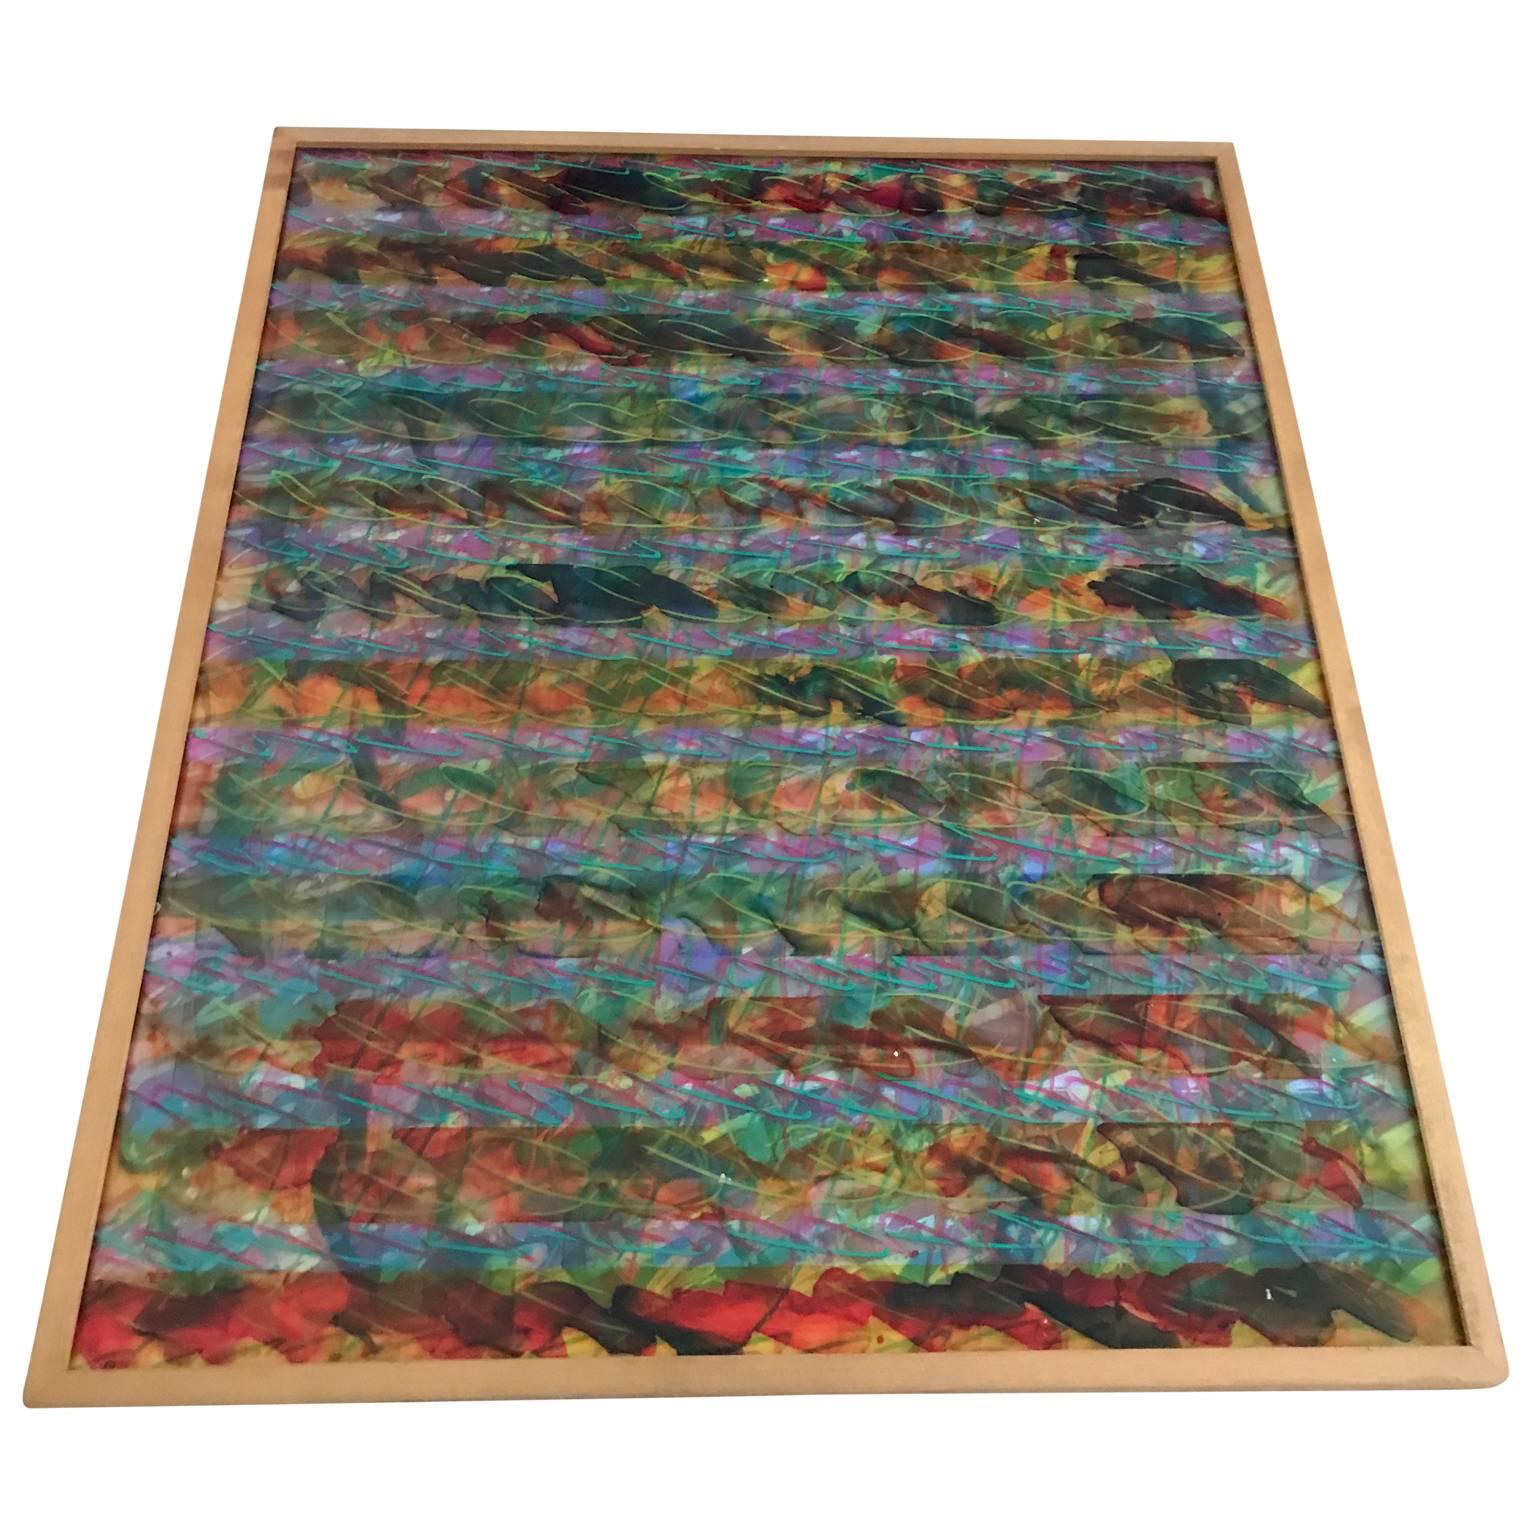 Hand-Painted Abstract Layered Glass Painting